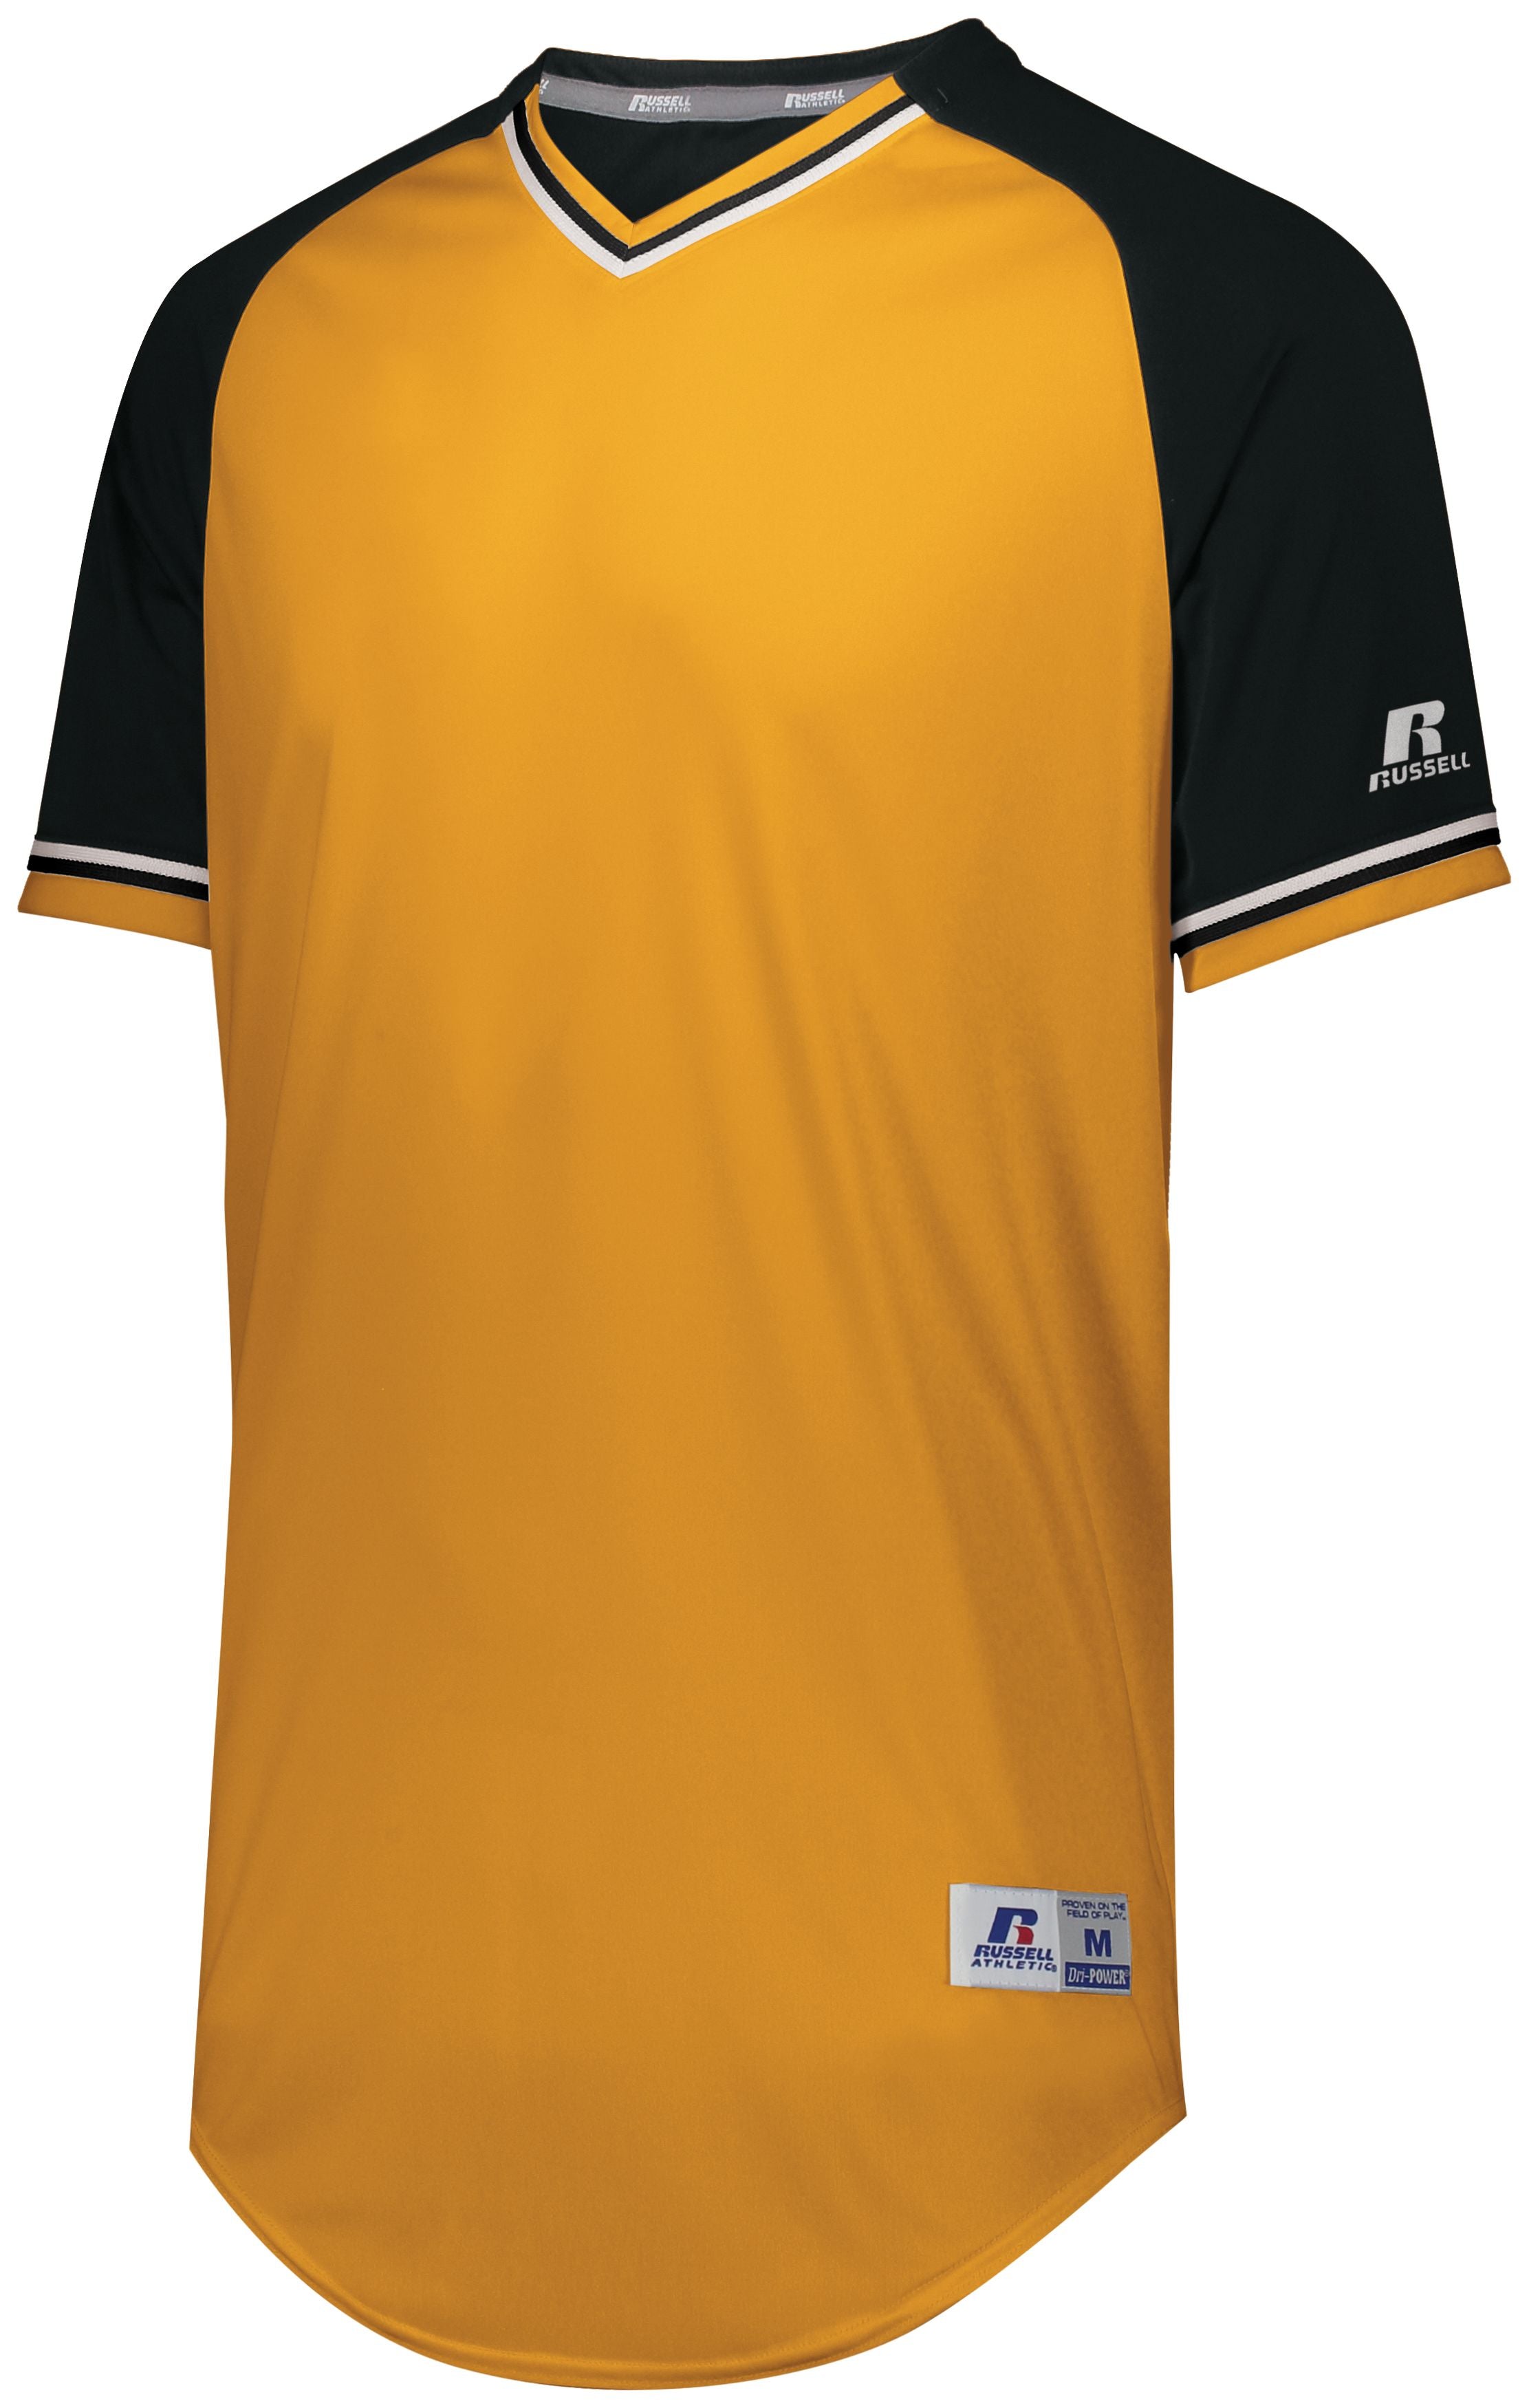 Russell Athletic Youth Classic V-Neck Jersey in Gold/Black/White  -Part of the Youth, Youth-Jersey, Baseball, Russell-Athletic-Products, Shirts, All-Sports, All-Sports-1 product lines at KanaleyCreations.com